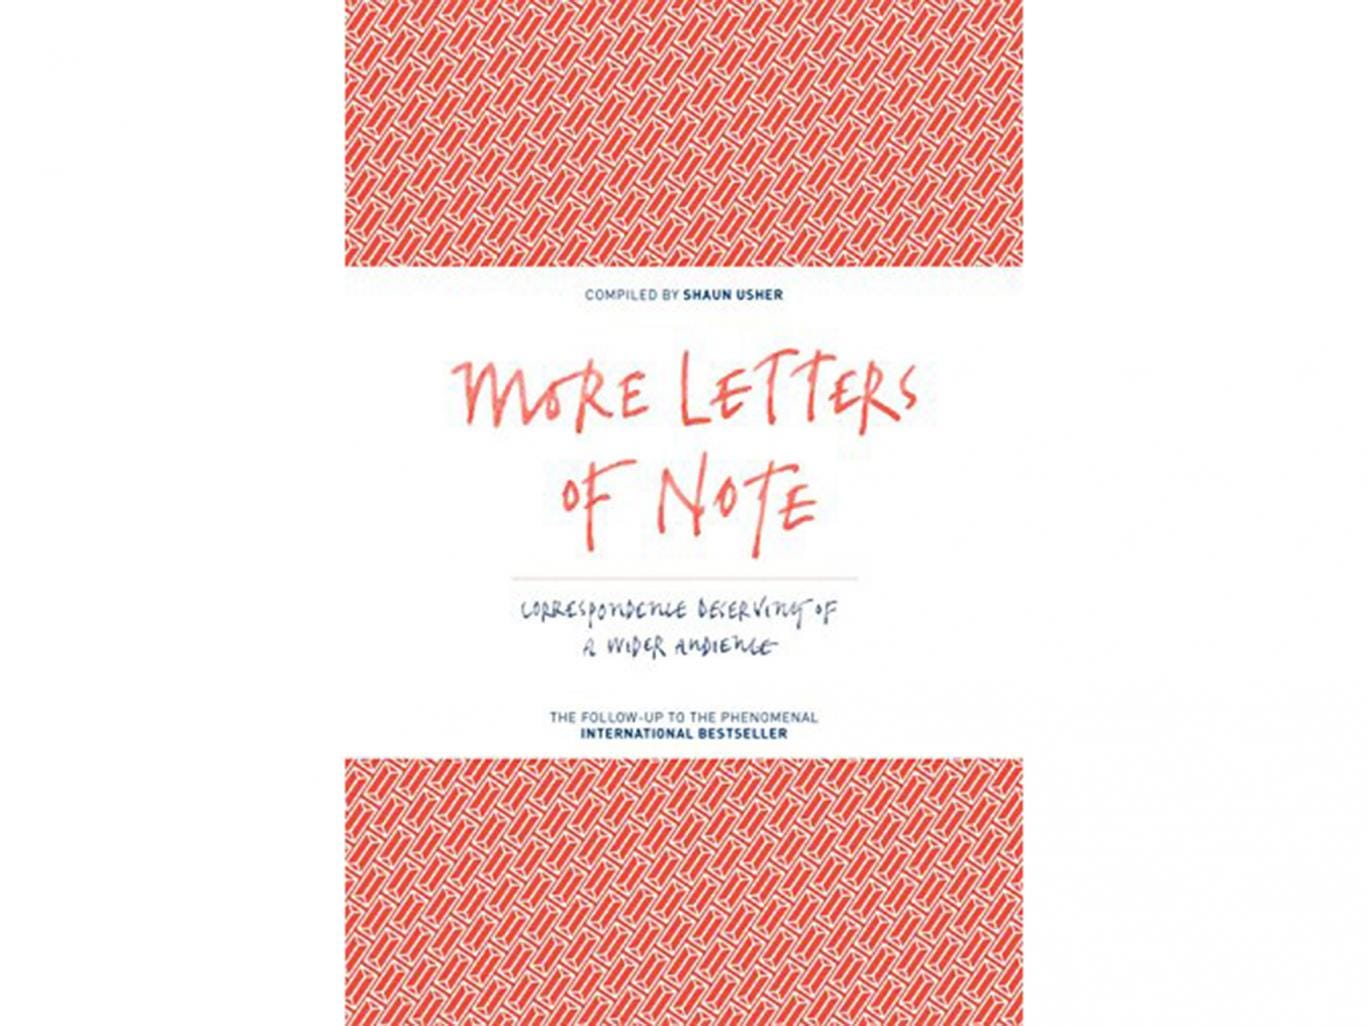 Letters of Note by Shaun Usher